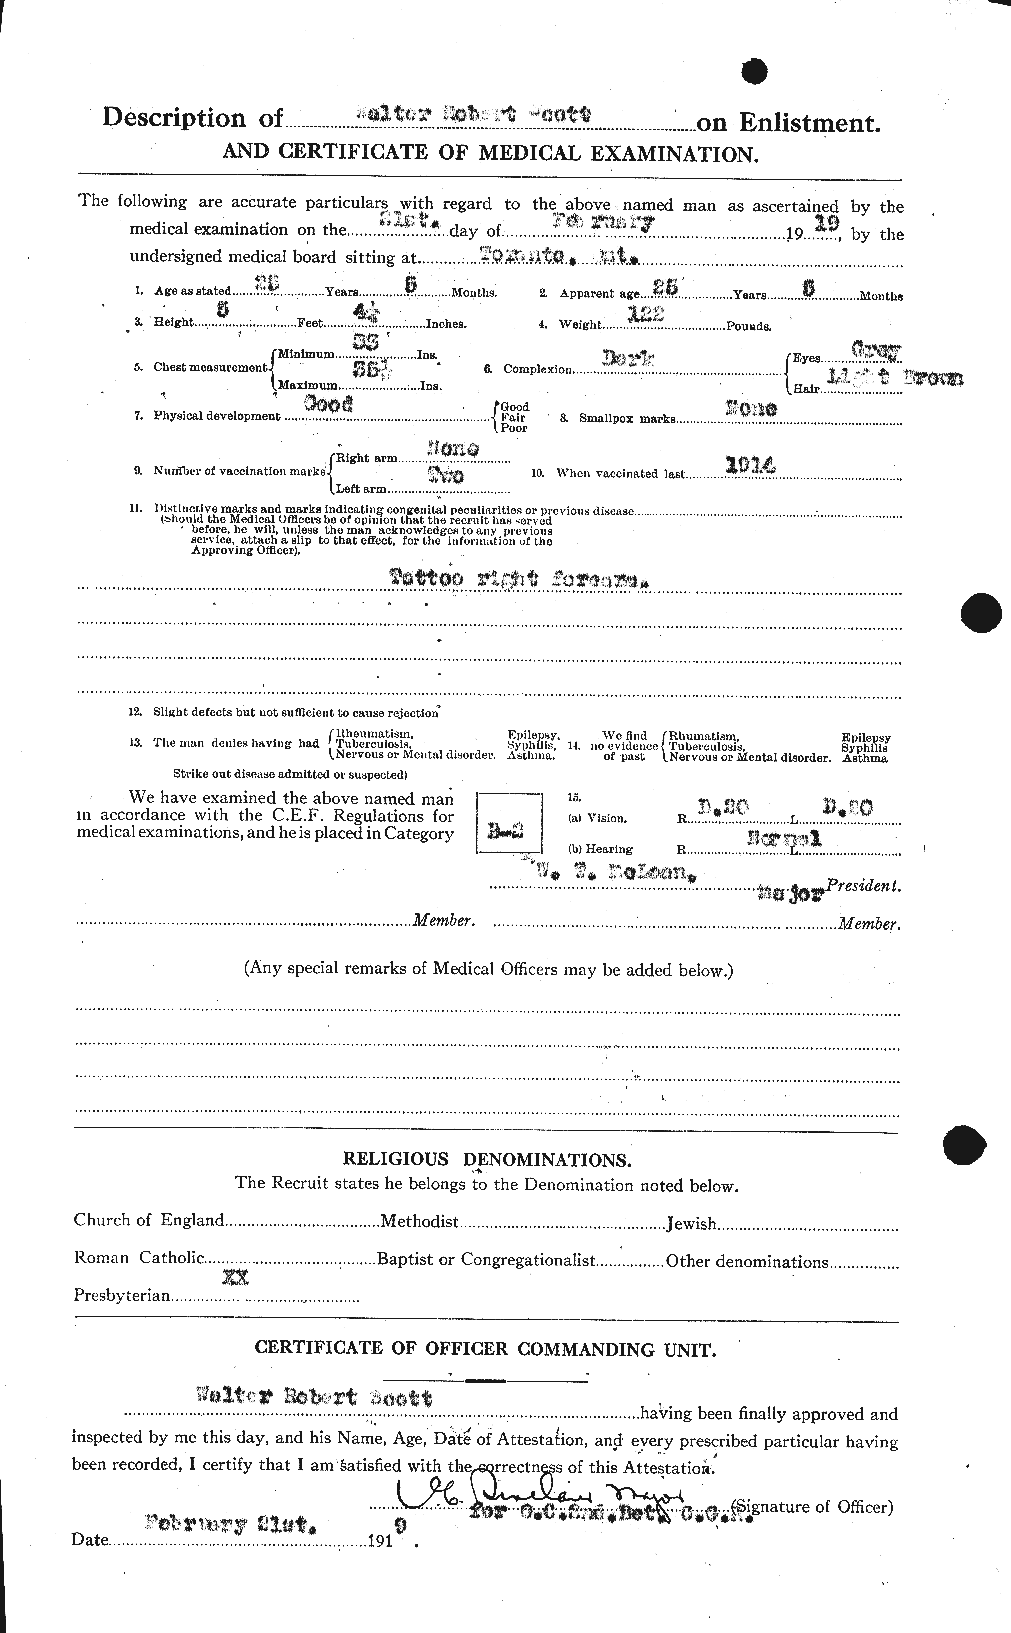 Personnel Records of the First World War - CEF 087692b